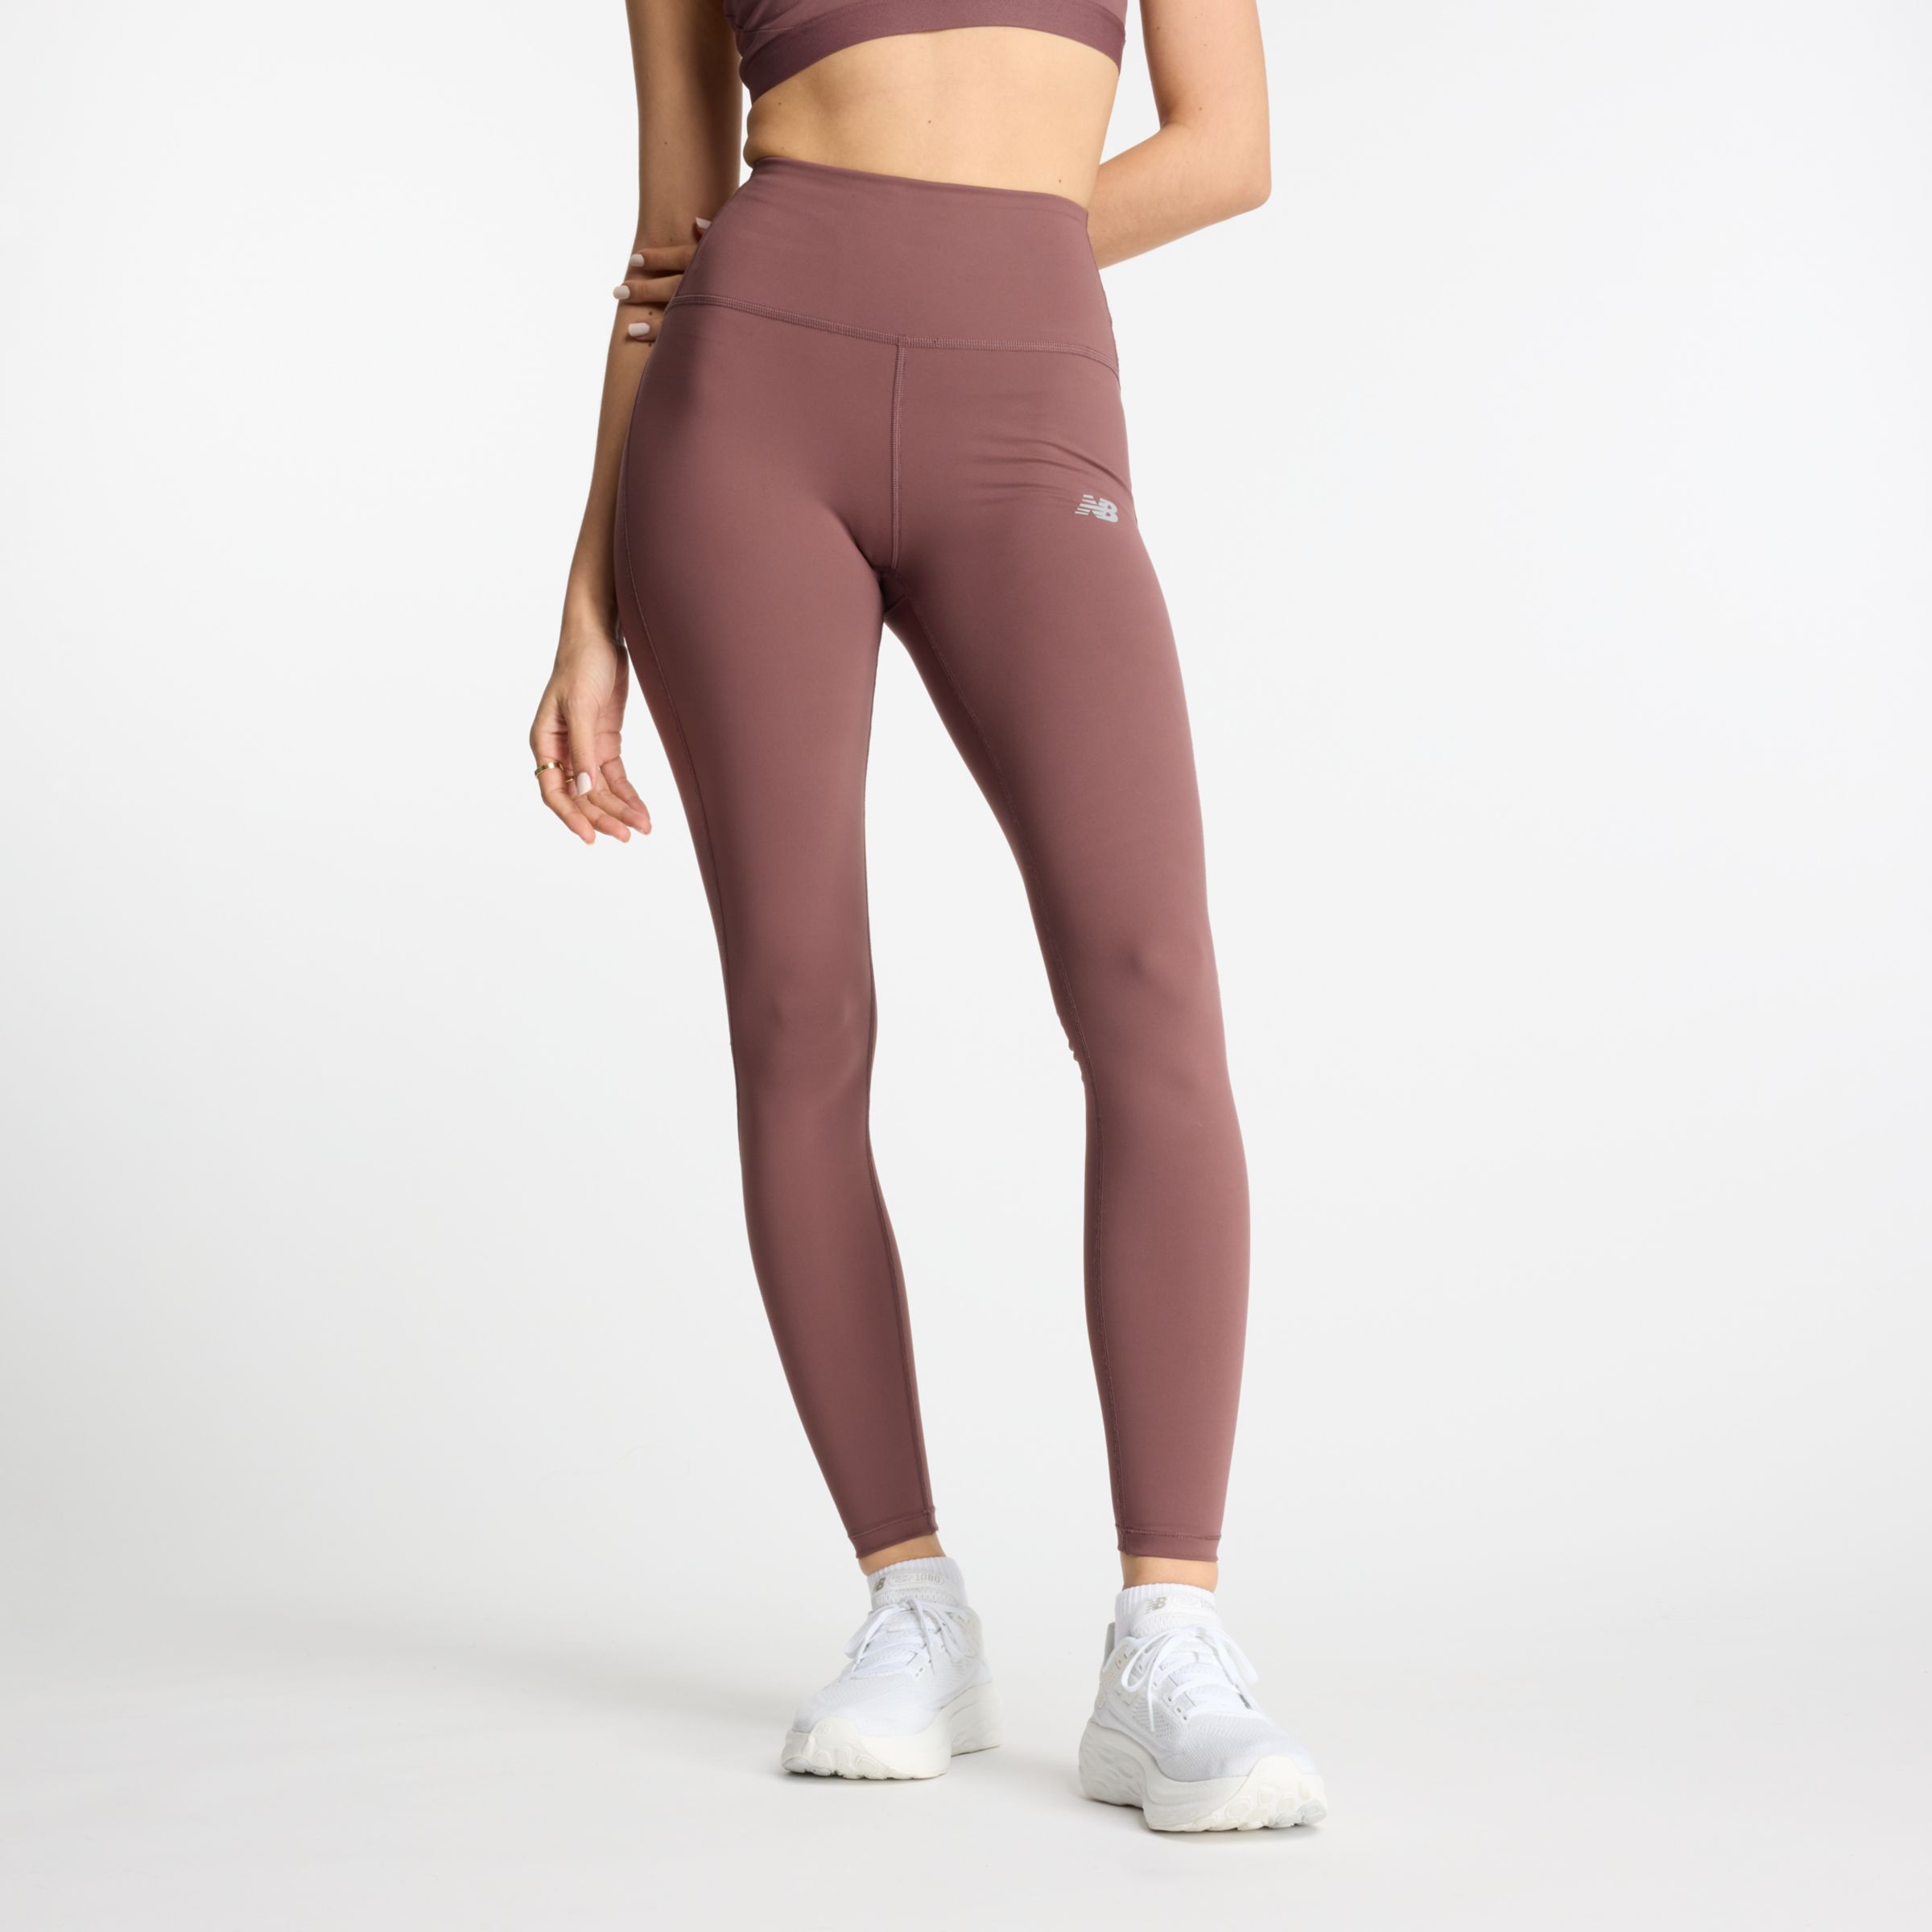 Buyer's Guide to Sizing and Ordering Gymshark Leggings